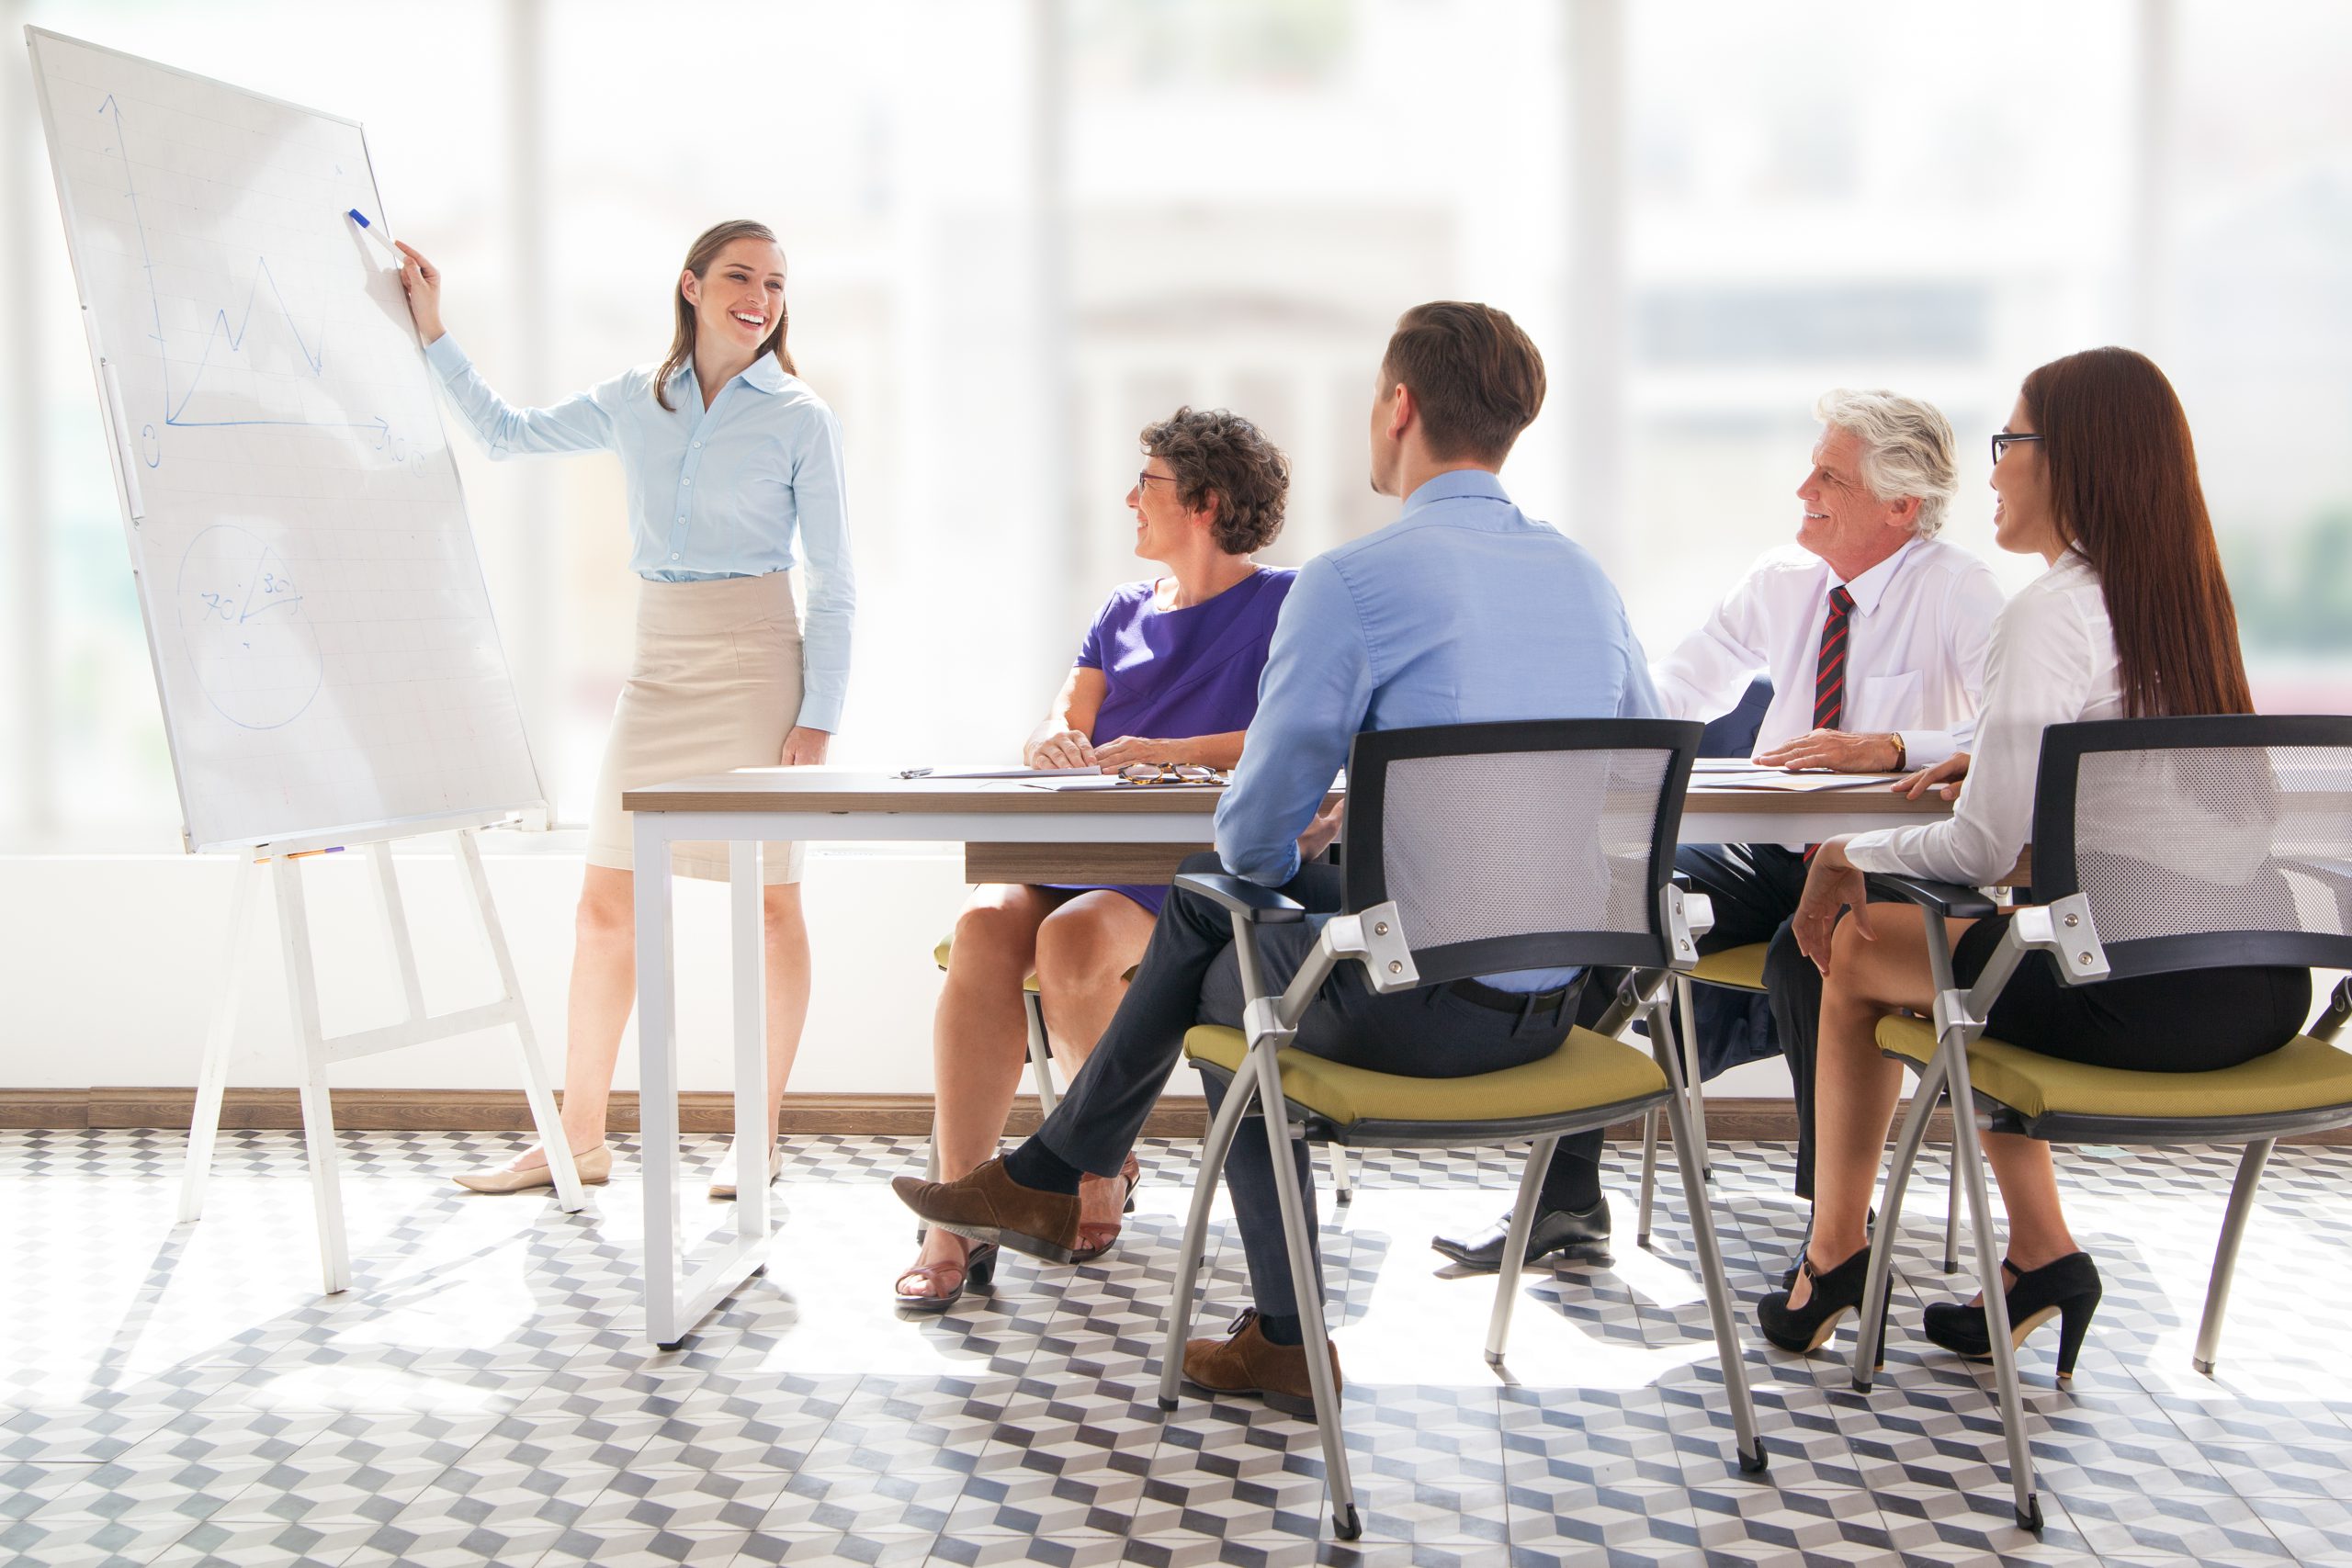 Cheerful young businesswoman pointing at whiteboard and explaining strategy. Confident business coach presenting project to staff. Colleagues listening to presenter. Business meeting concept